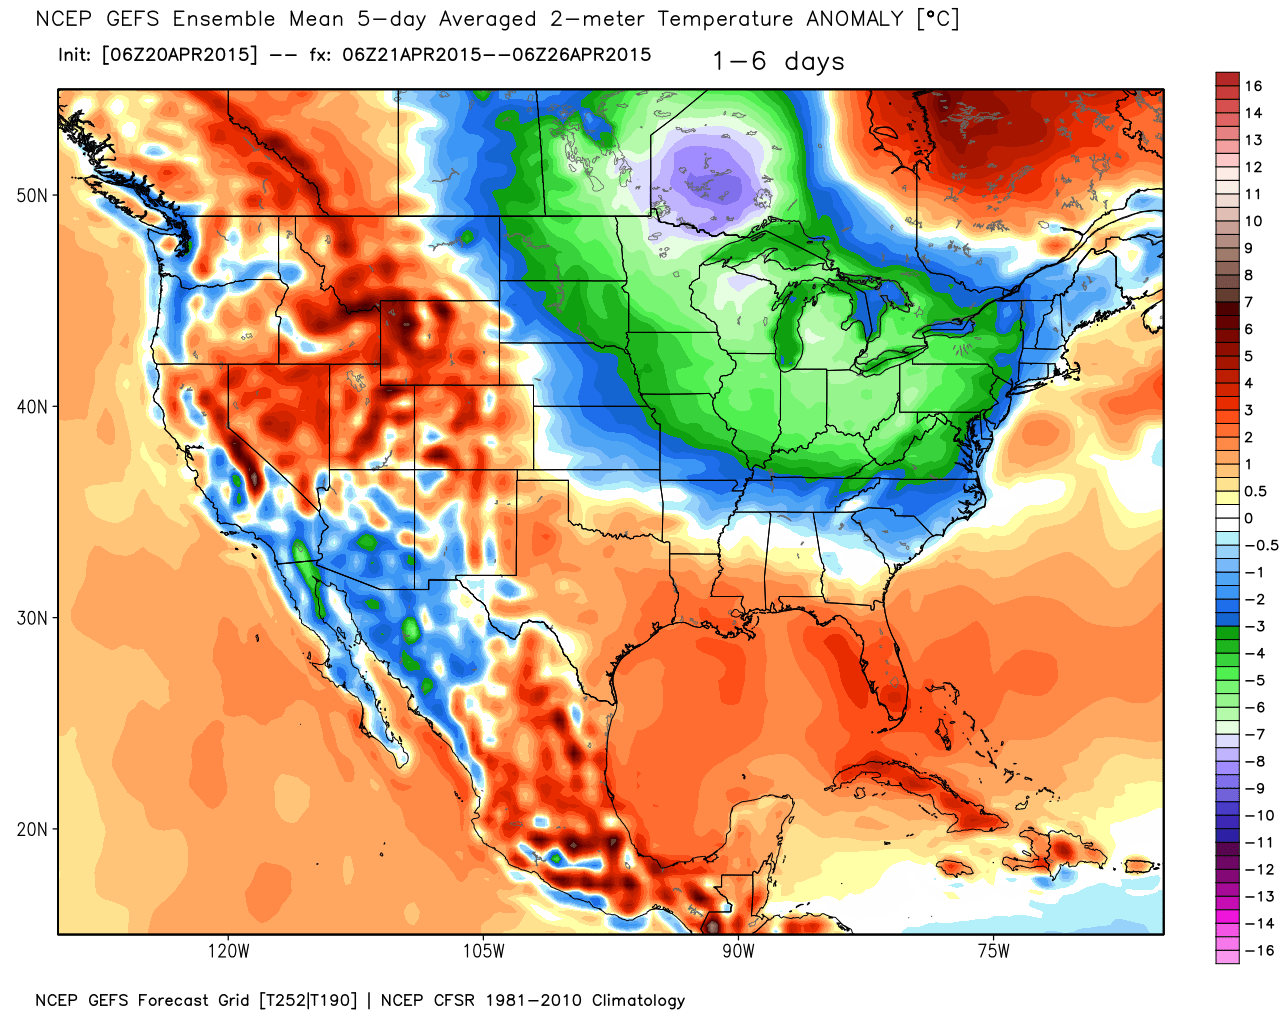 April 21 through April 26, 2015 Projected Temperature Anomaly from Average